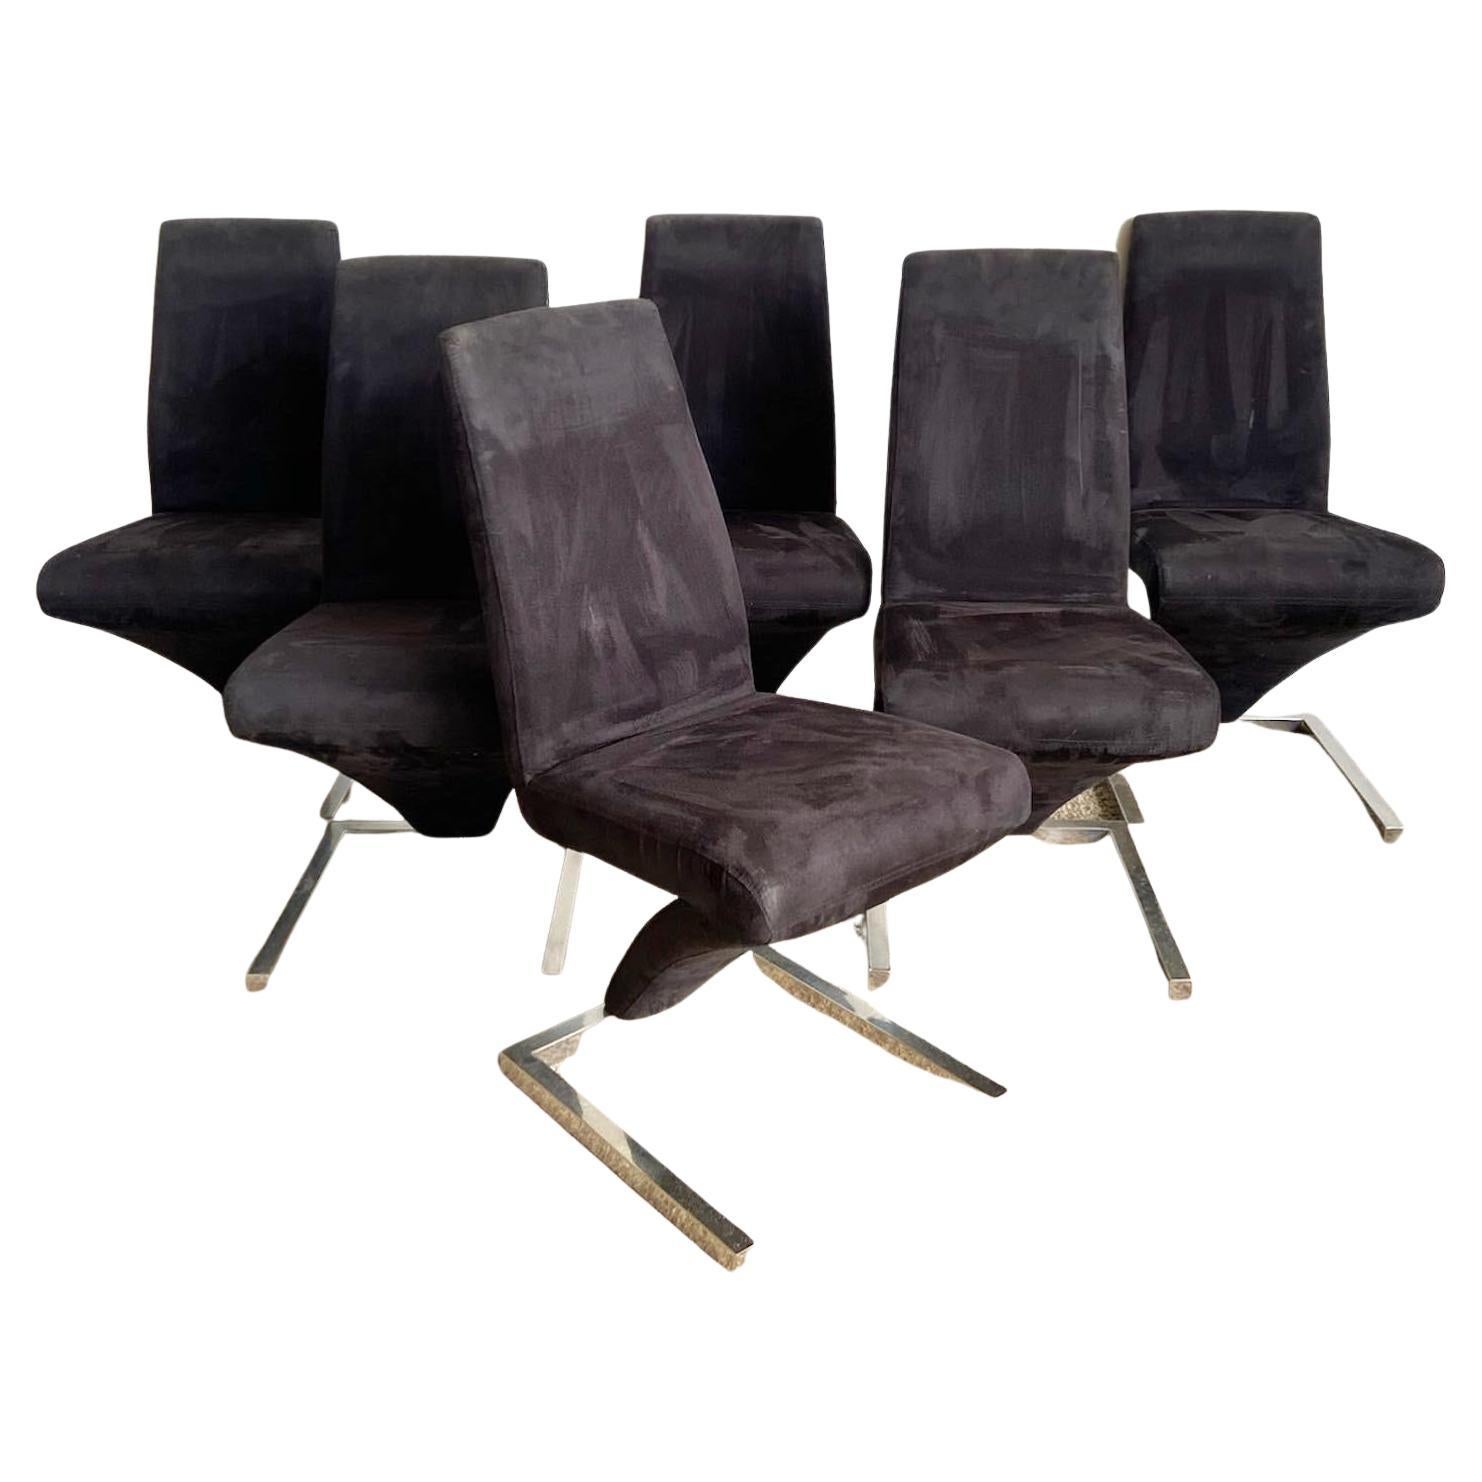 Postmodern Black Fabric Cantilever Zig Zag Dining Chairs With Chrome Base For Sale